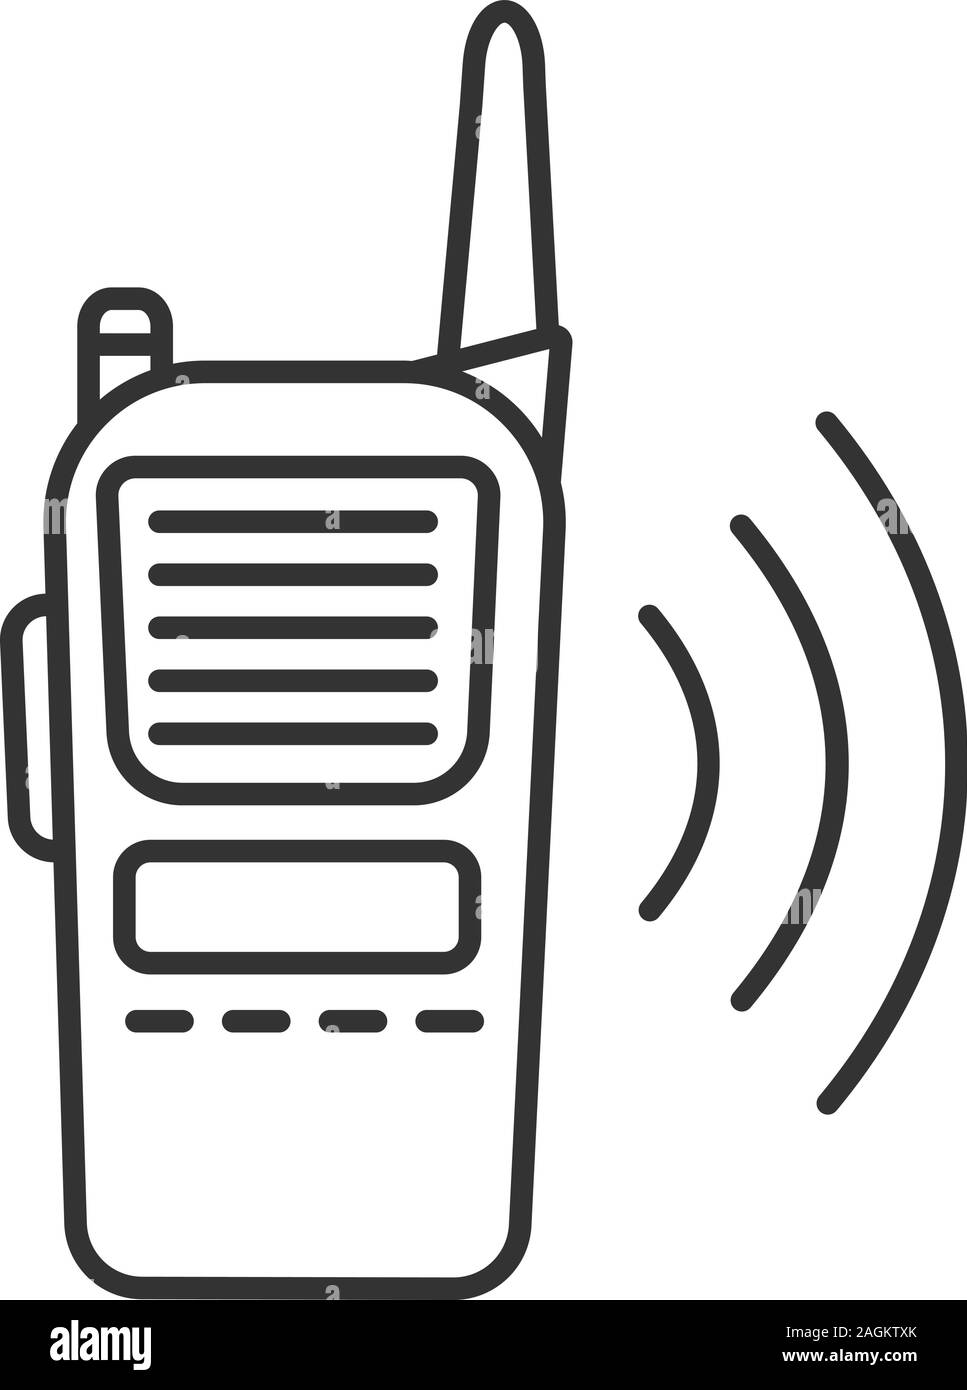 Radio Set Sketch Icon Stock Illustration  Download Image Now  Antenna   Aerial Business Finance and Industry Communication  iStock